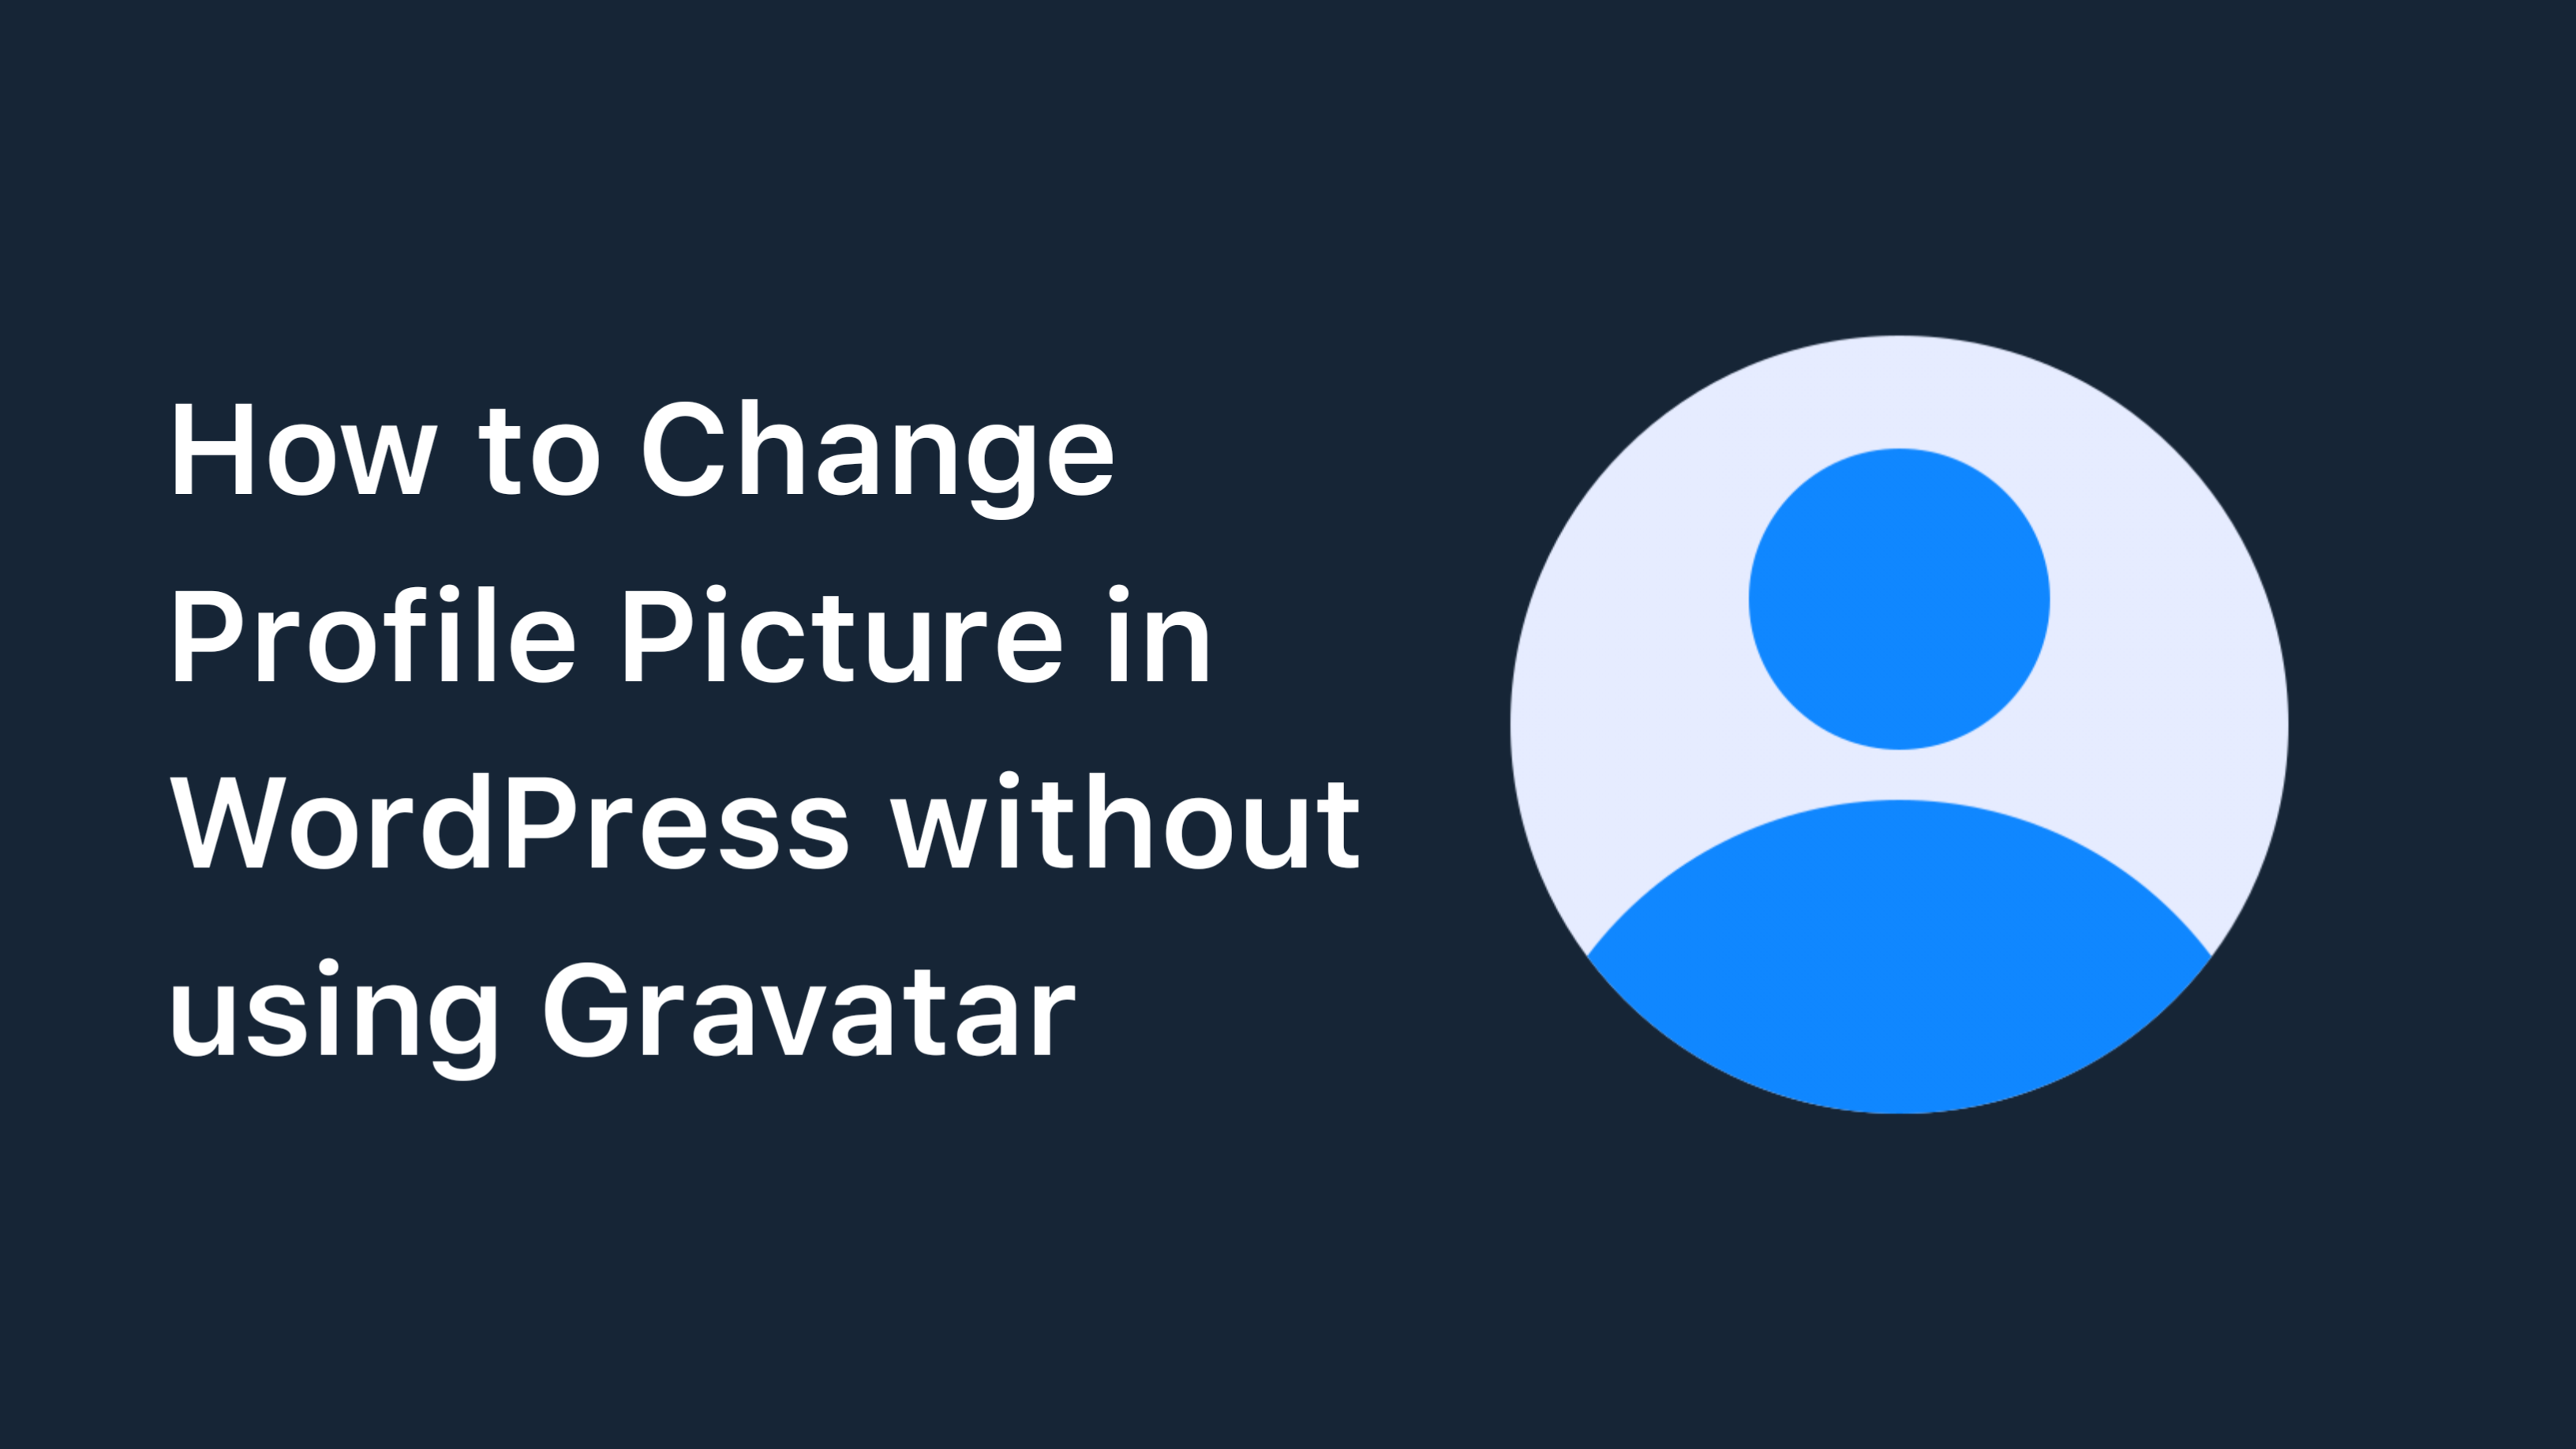 How to Change Profile Picture in WordPress without using Gravatar